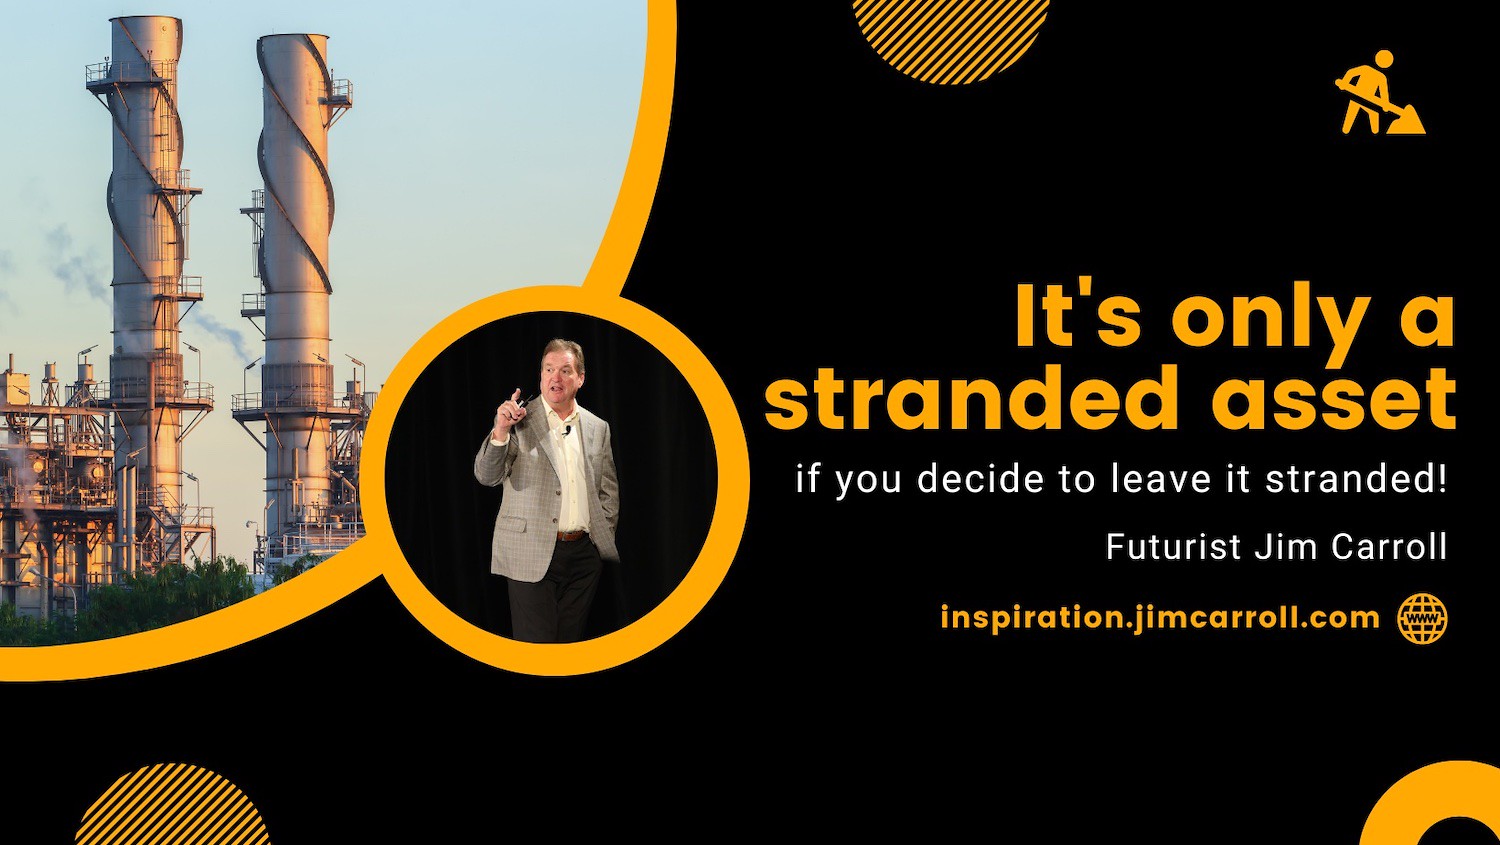 "It's only a stranded asset if you decide to leave it stranded!" - Futurist Jim Carroll